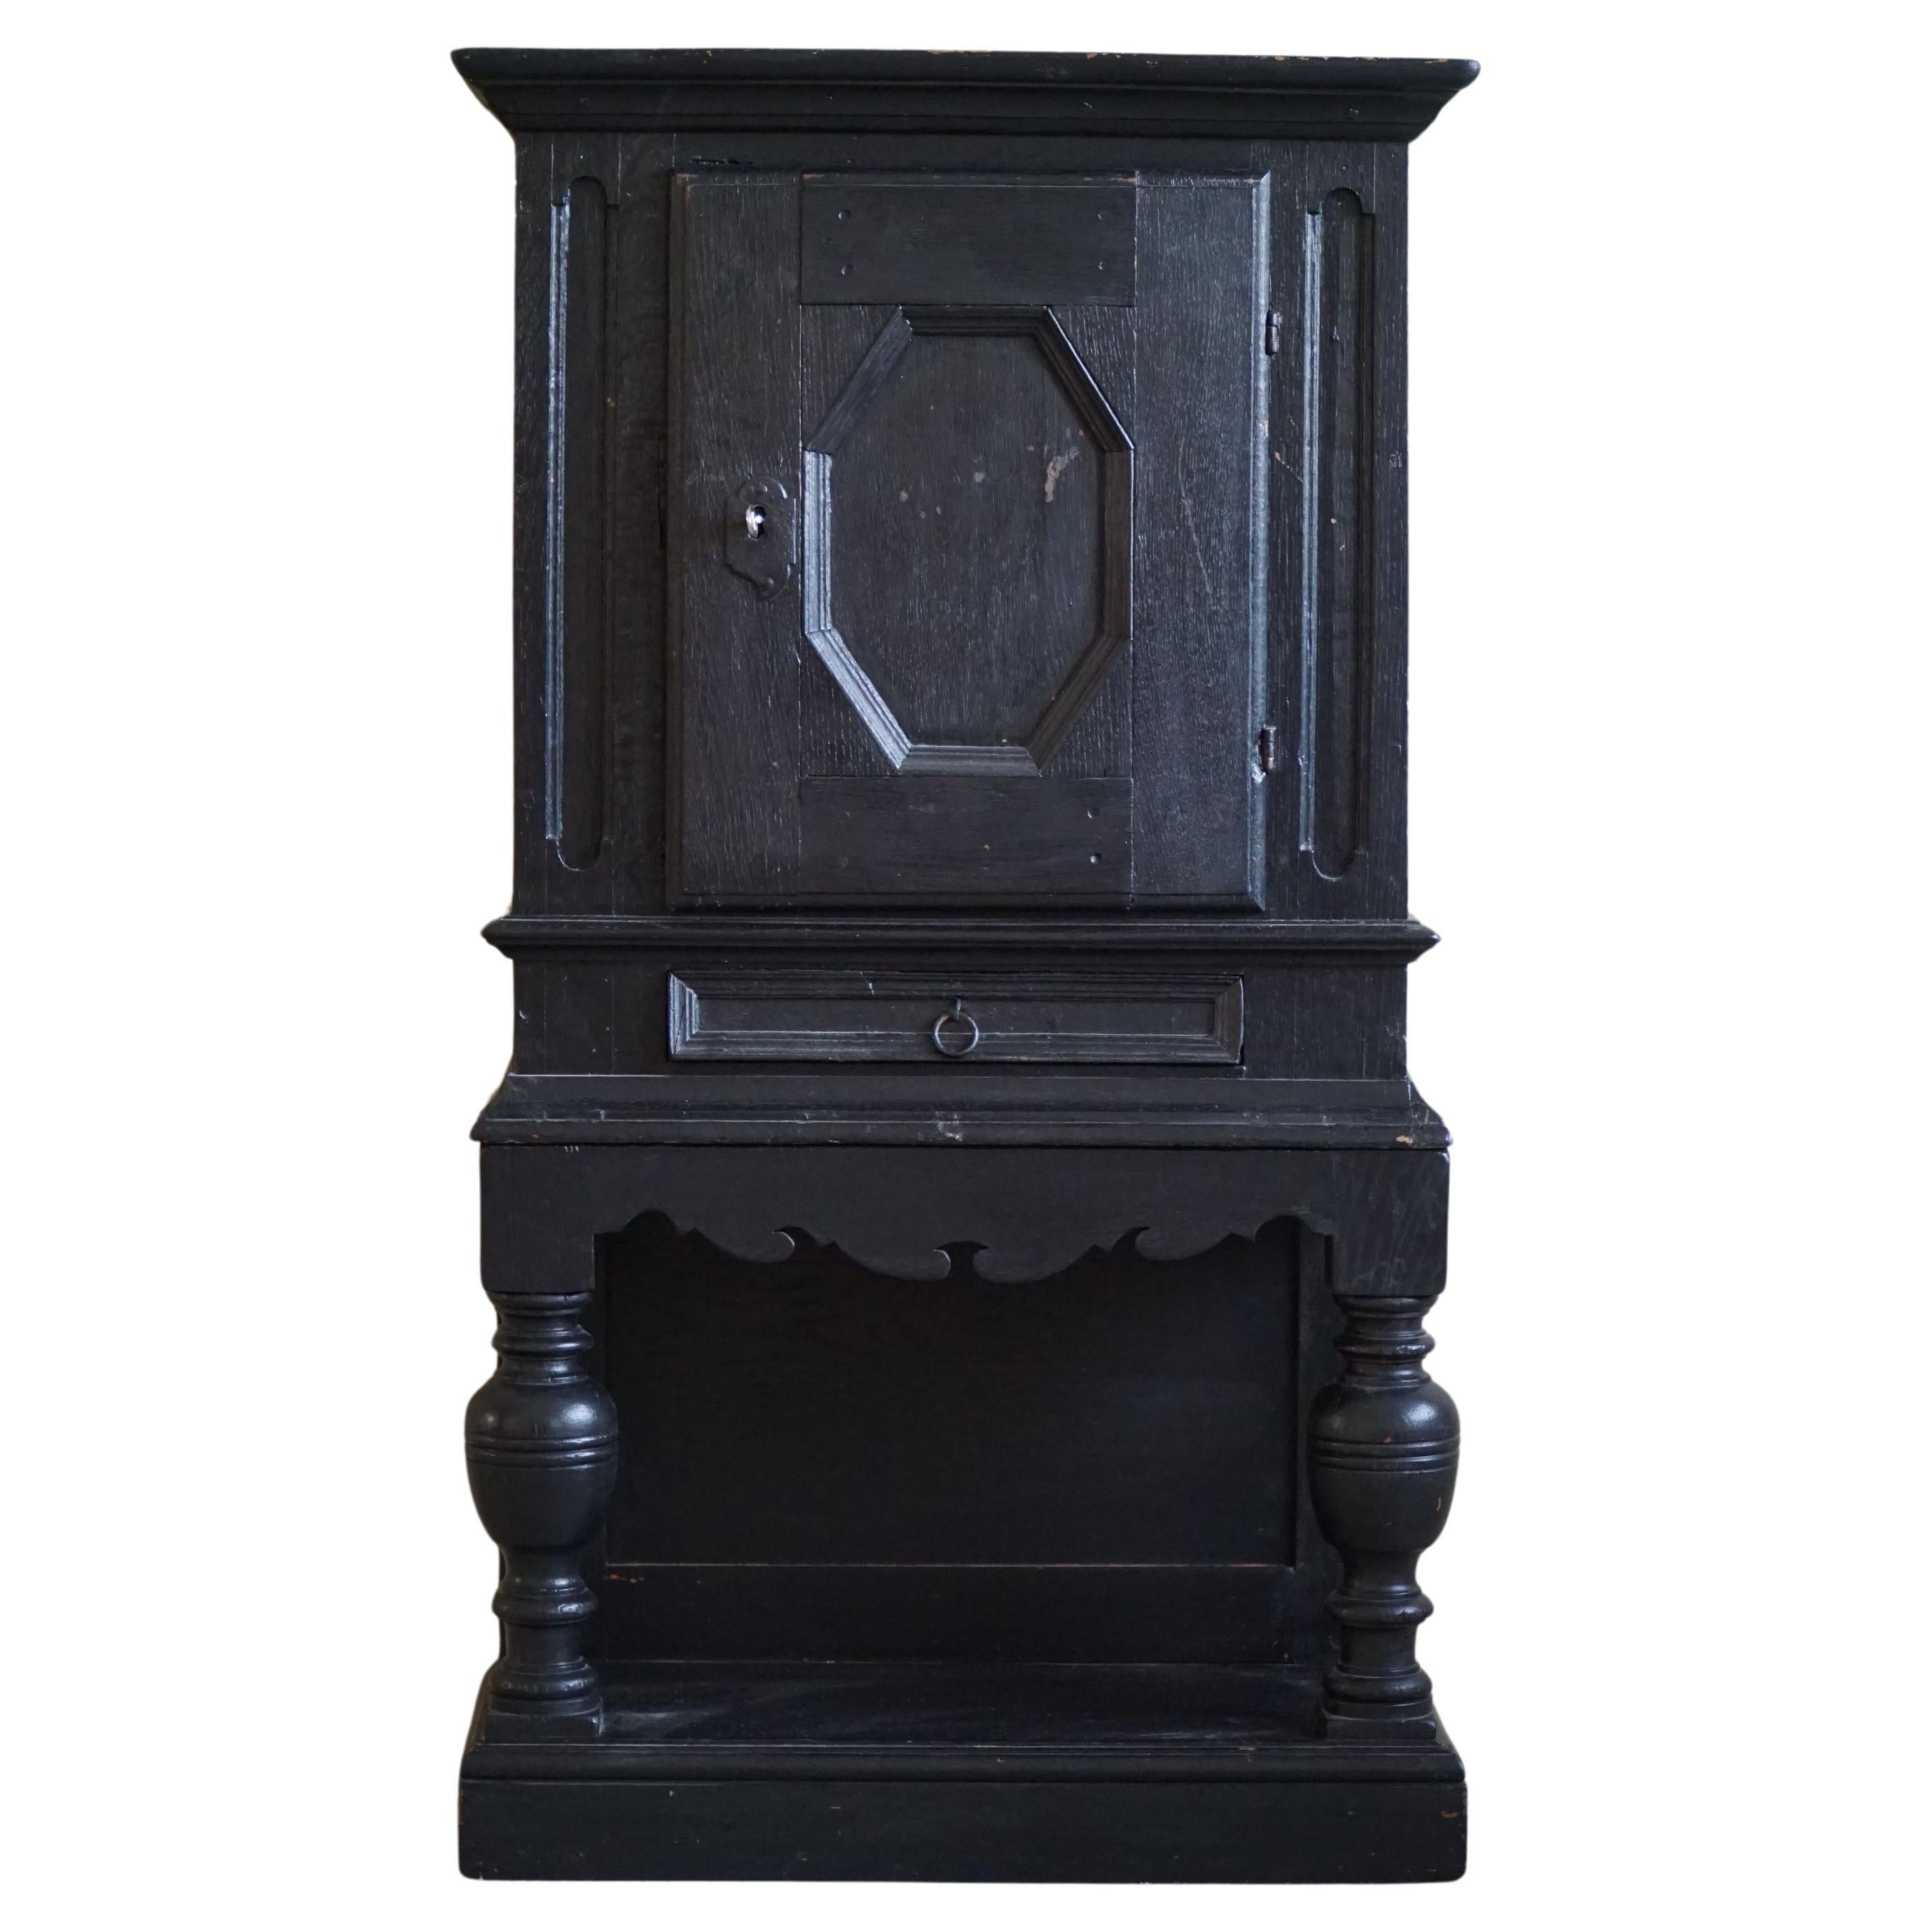 18th Century, Antique Black Painted Cabinet by a Danish Cabinetmaker, Baroque